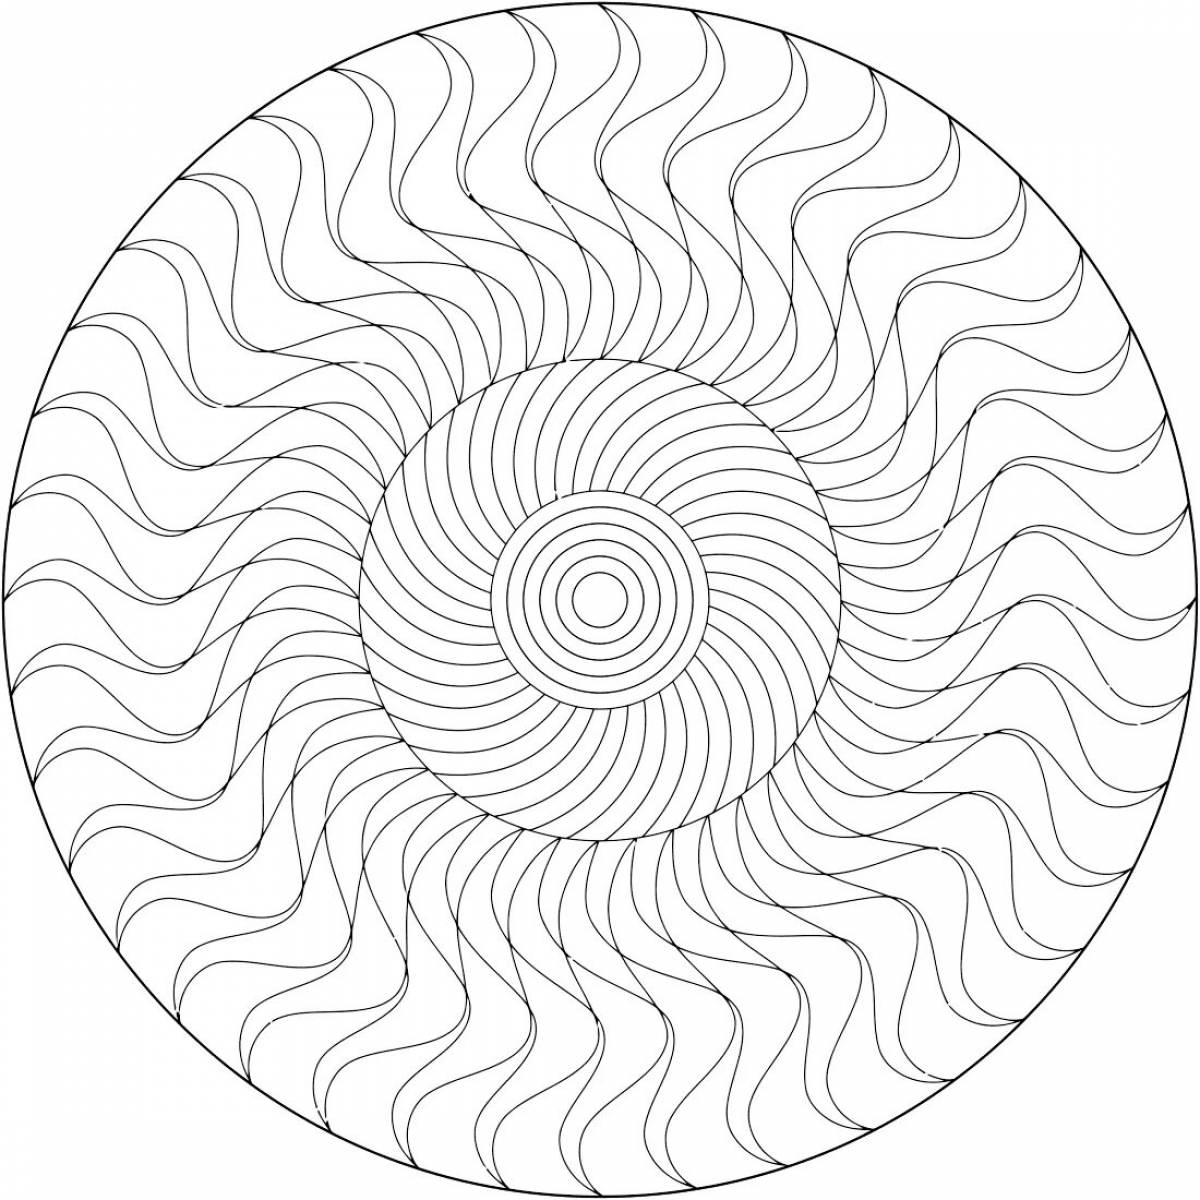 Color-fantastic round lines create coloring page